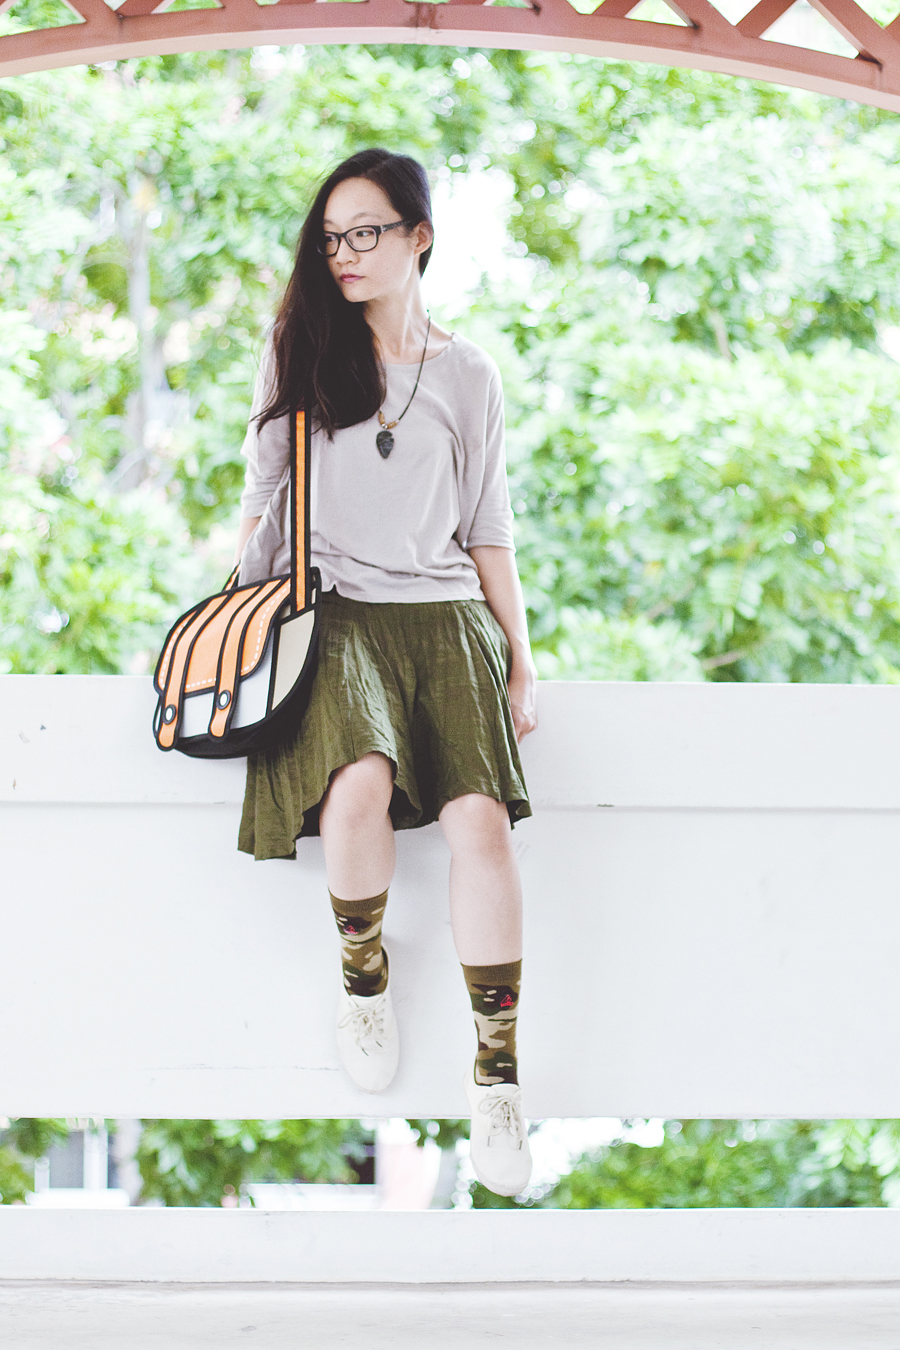 Forever 21 dolman sleeve top, agate necklace from Natural History Museum in Washington, Gap black rim glasses, Stance camo socks, Cotton On lace-ups, green flare skirt, orange 2D sling bag.